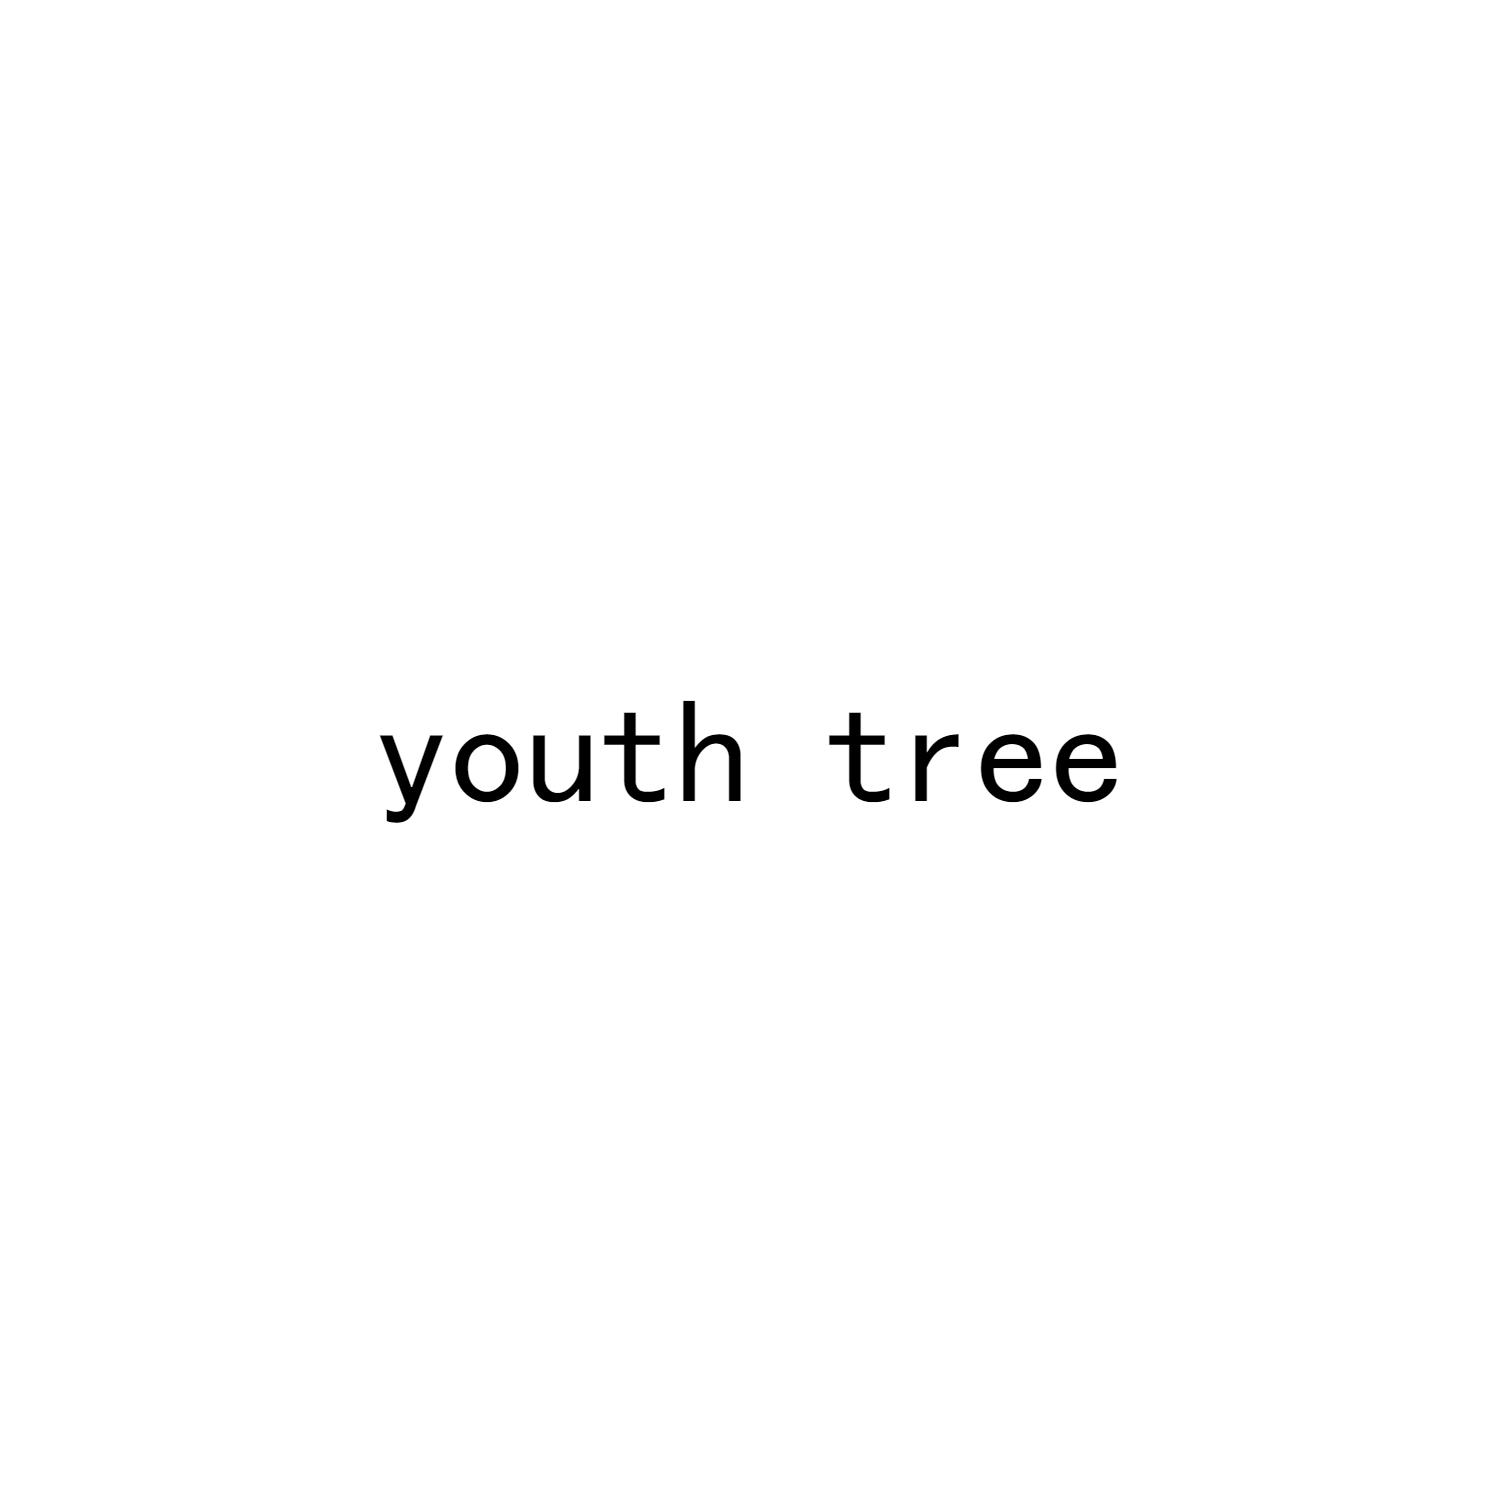 youthtree